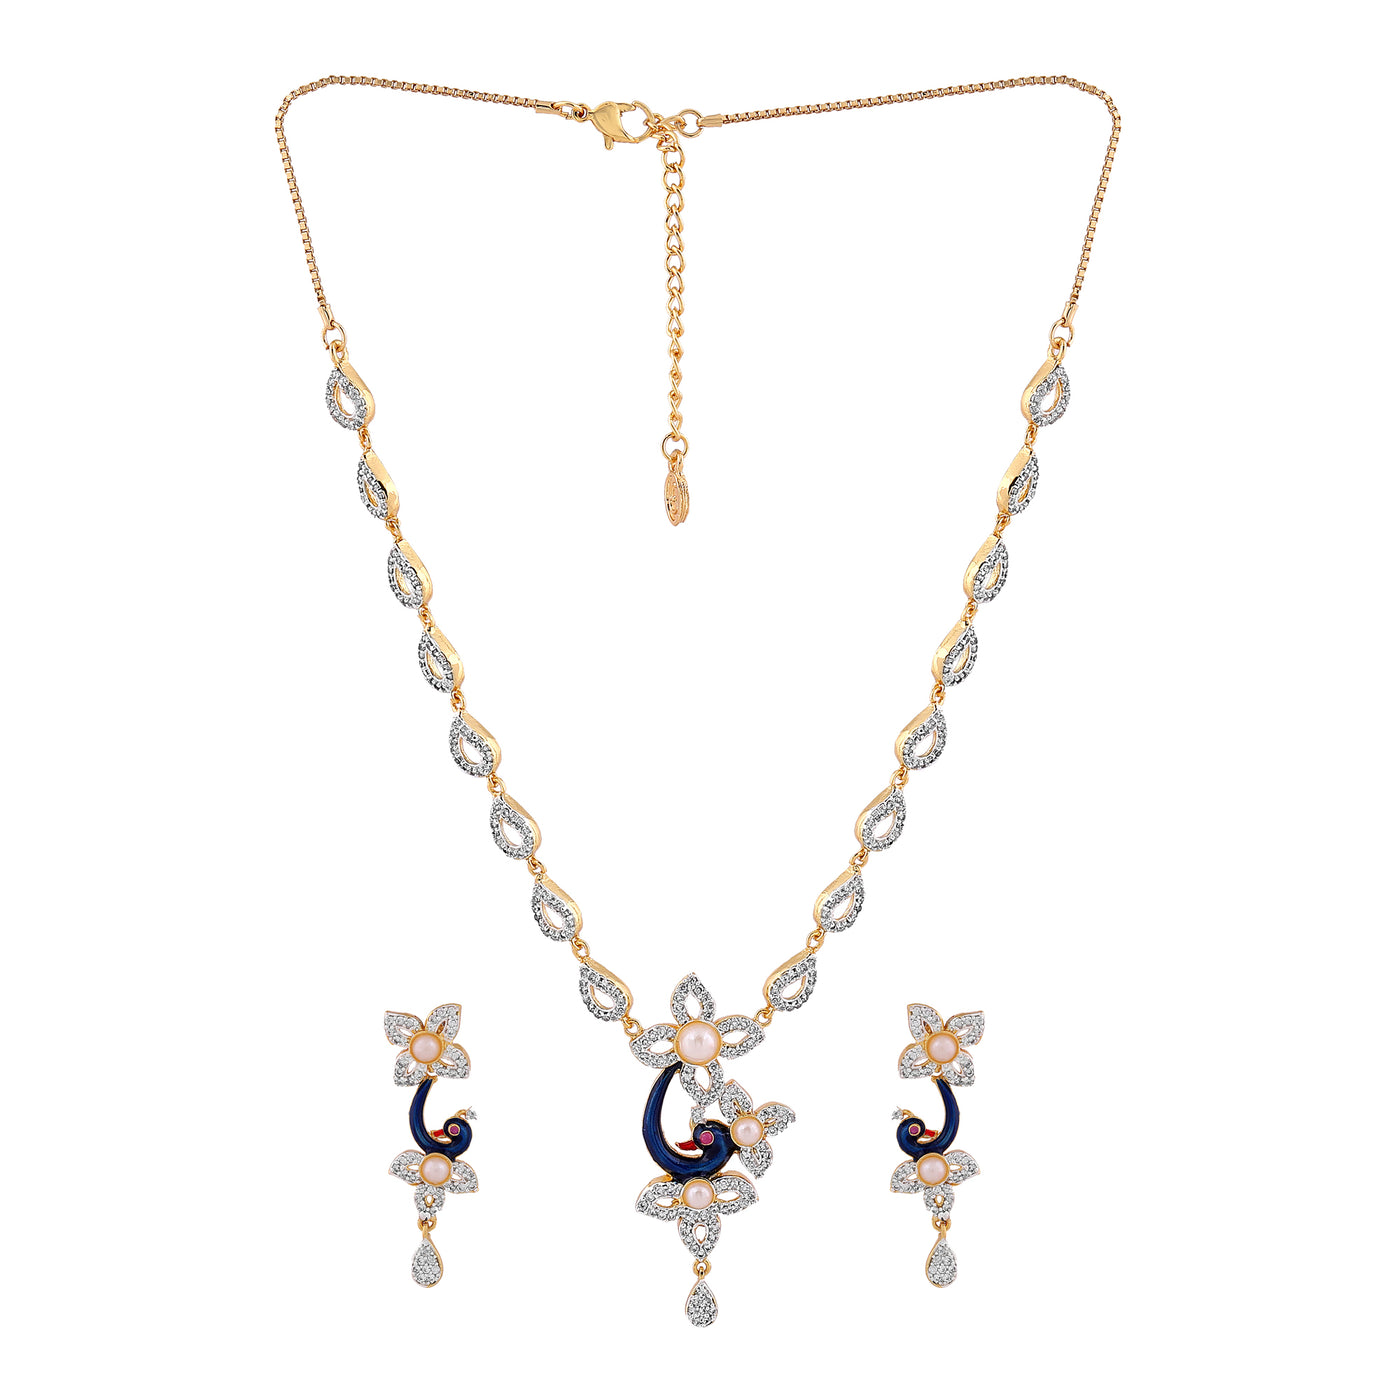 Estele 24 Kt Gold Plated Peacock Shaped American Diamond Necklace Set